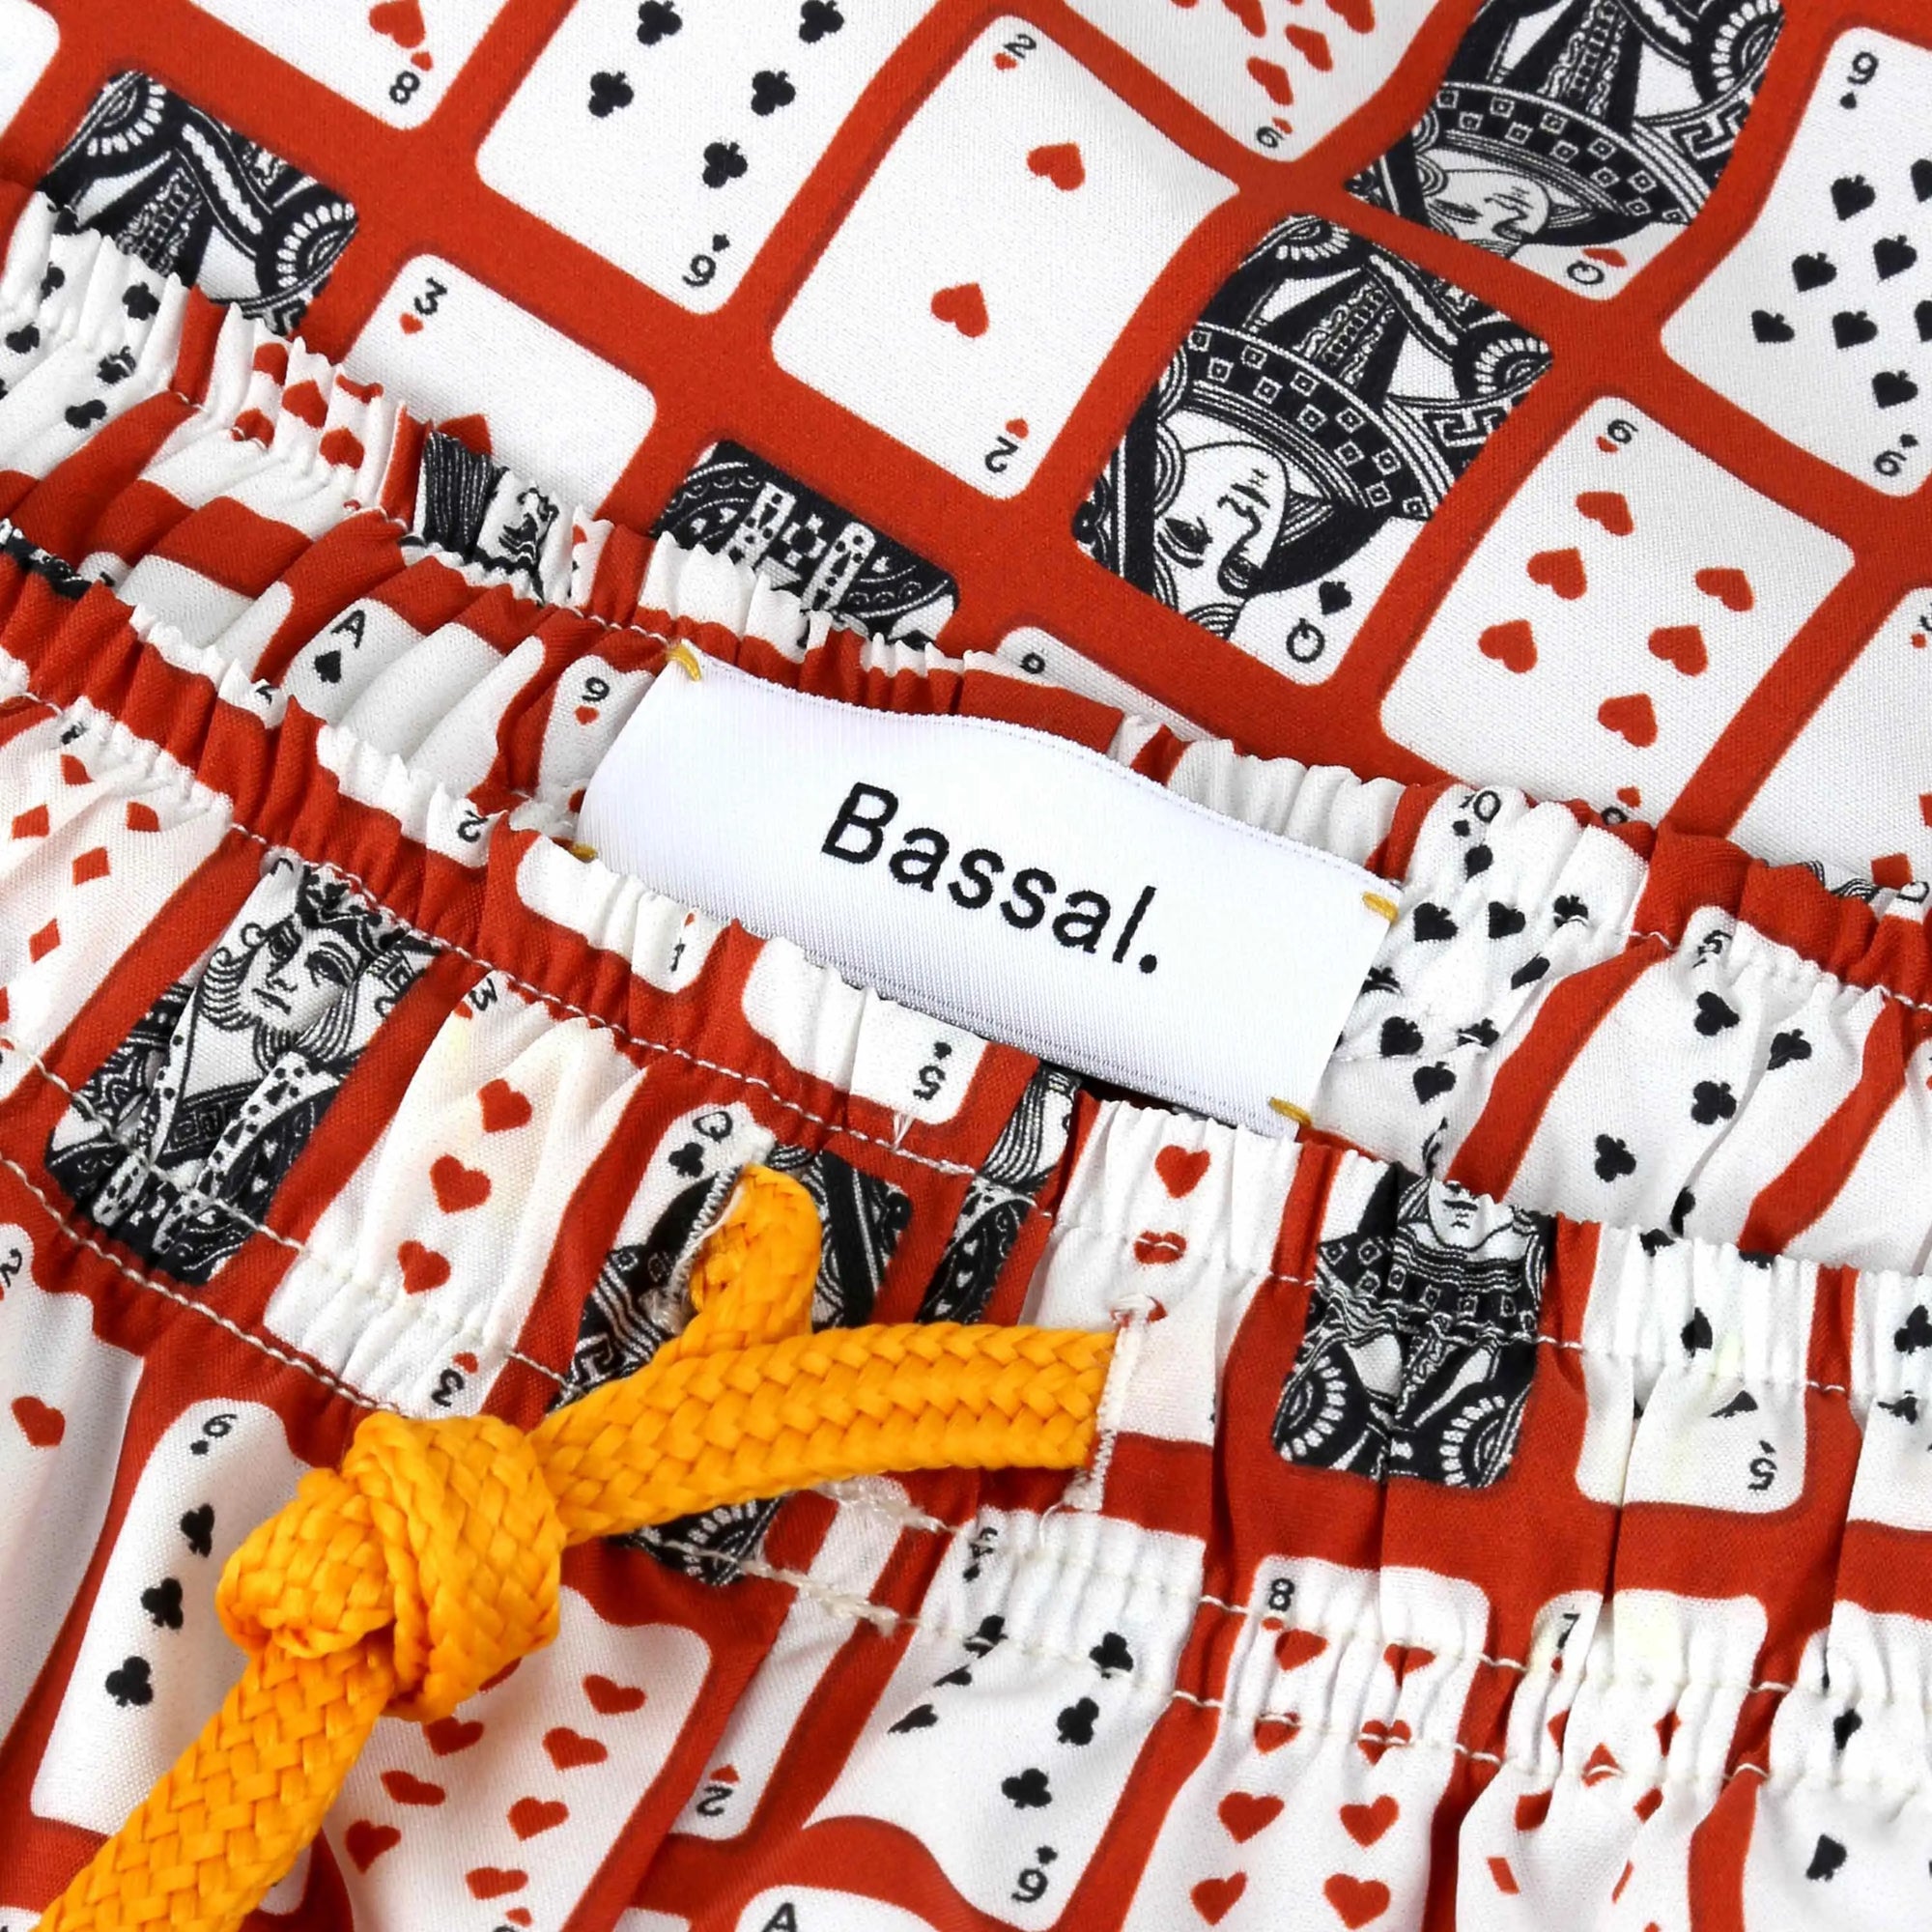 A small white box with a lid partially removed reveals a fabric bag inside. The bag, boasting a colorful playing card pattern and an orange drawstring, is from the Bassal. store in Barcelona. Attached to the bag are two tags—one blue and one white—with text including "Poker Swimwear".